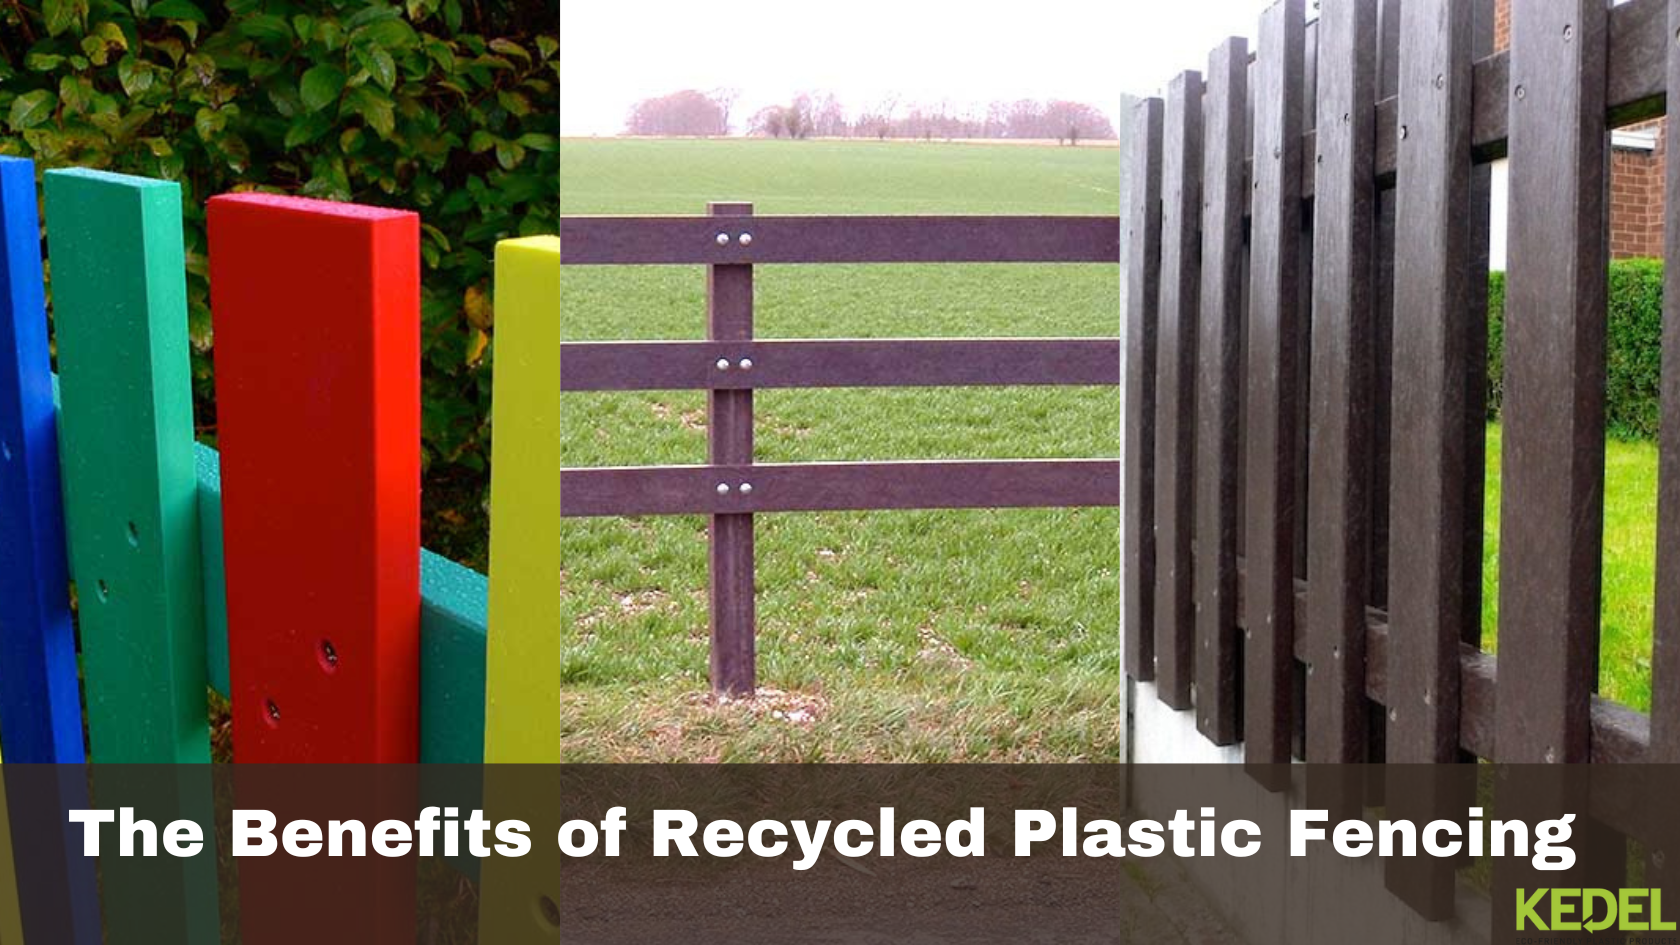 The Benefits of Recycled Plastic Fencing